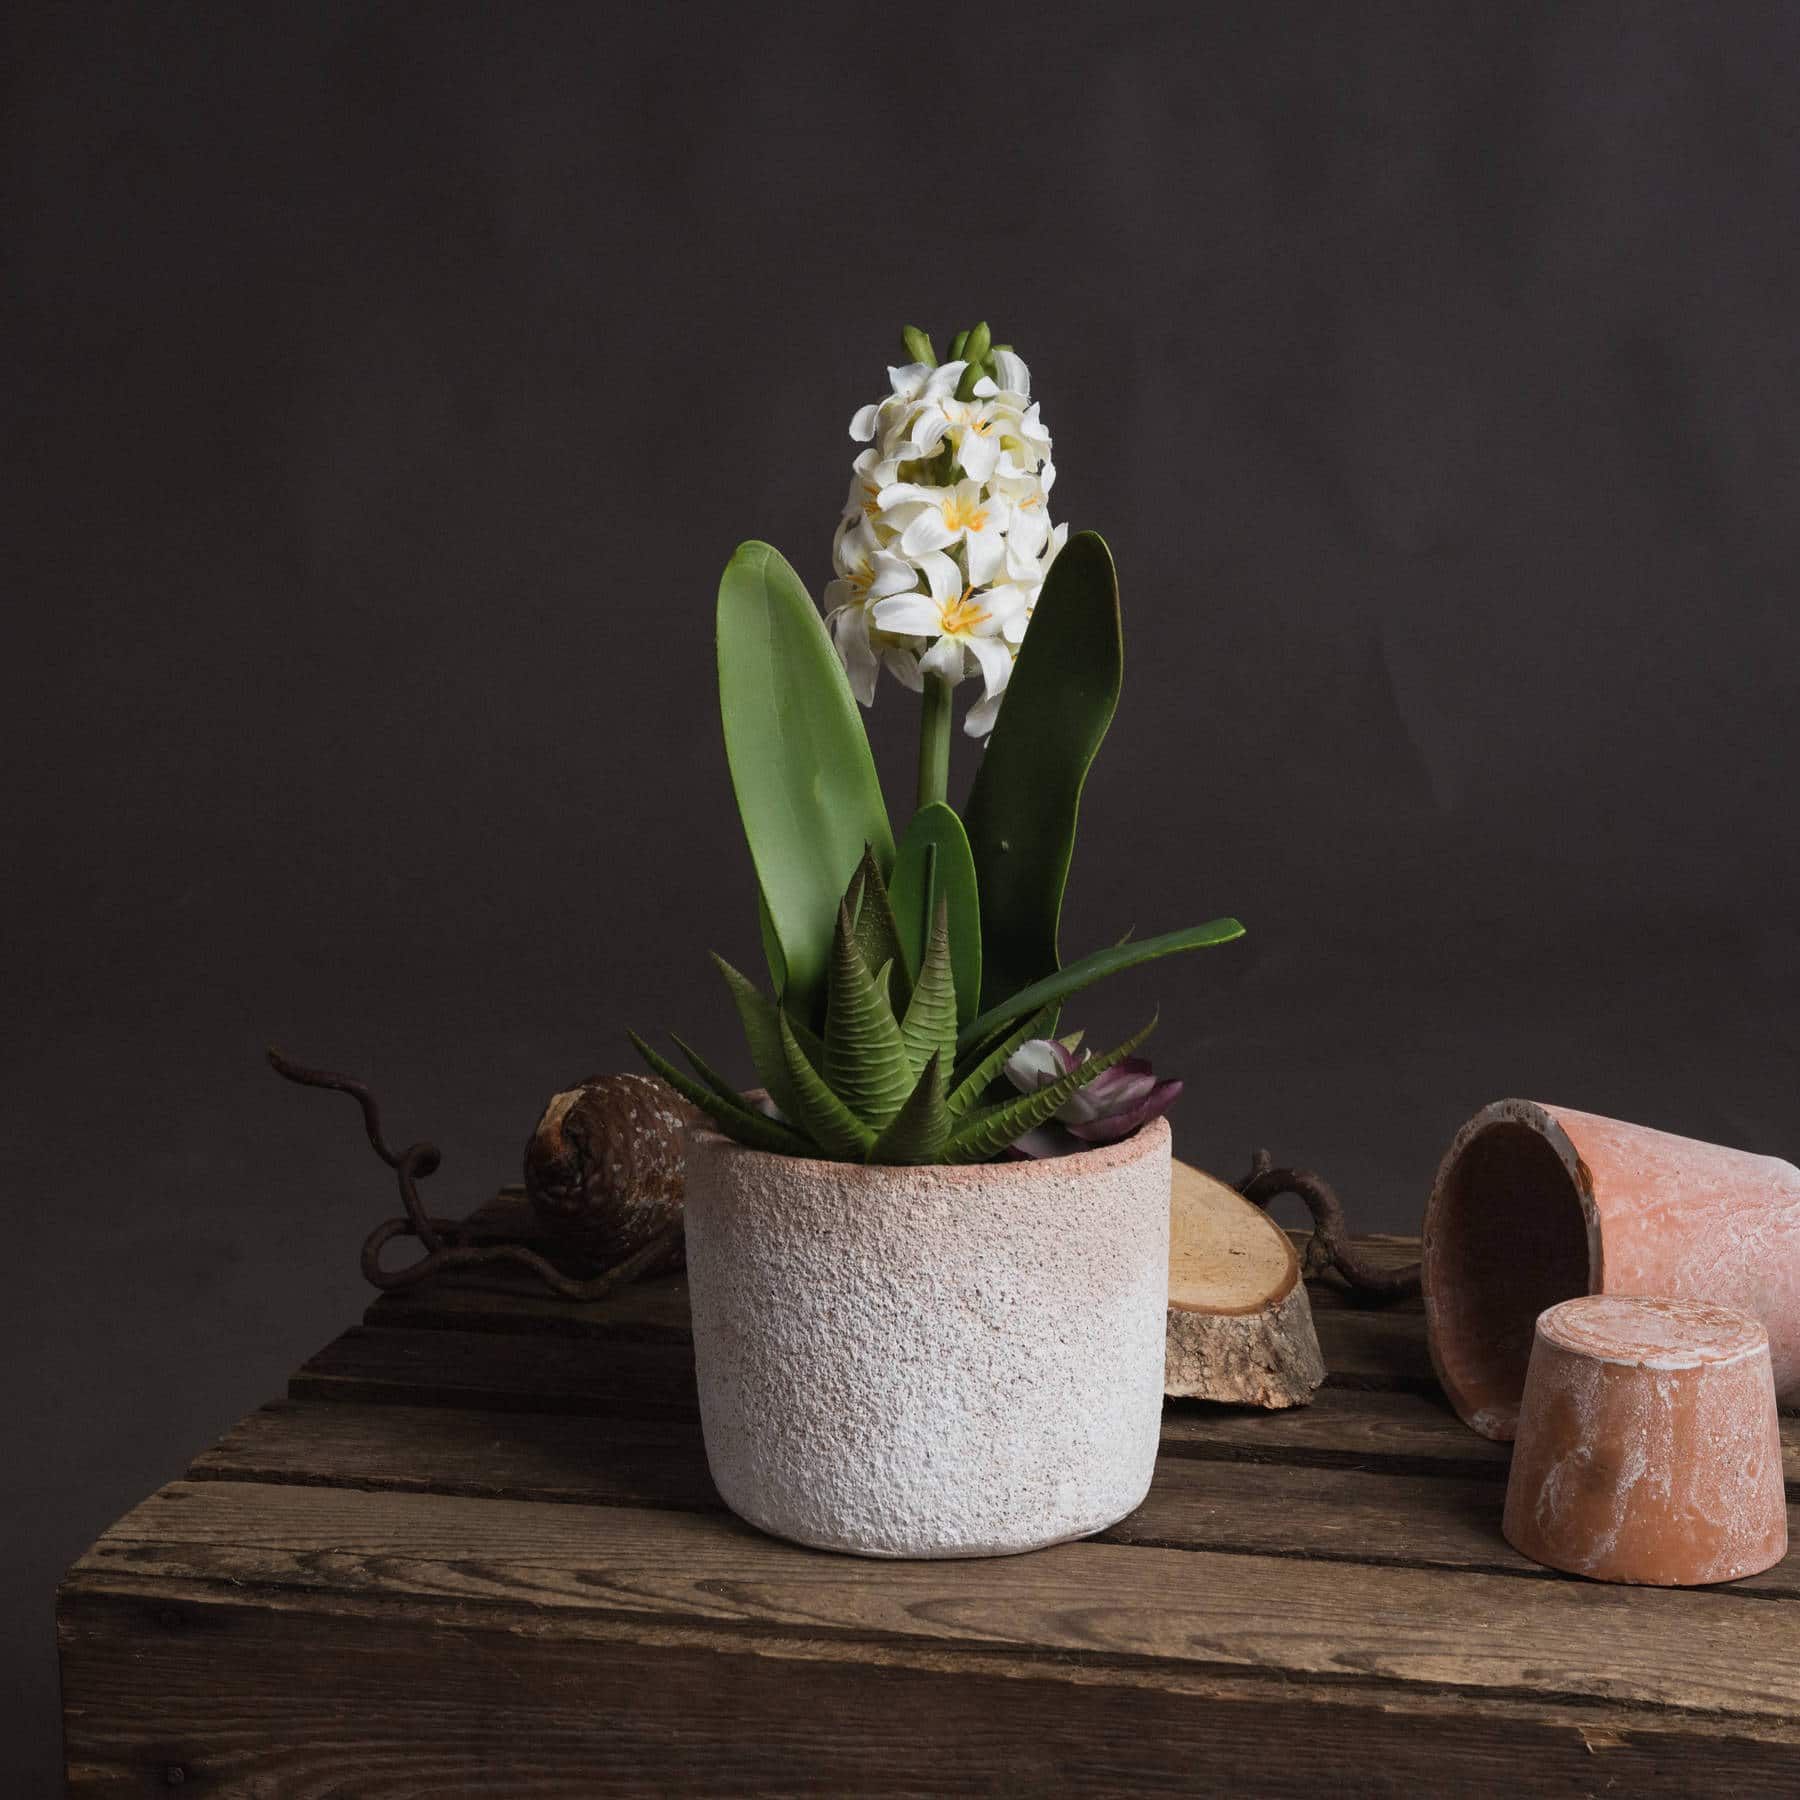 Potted White Hyacinth